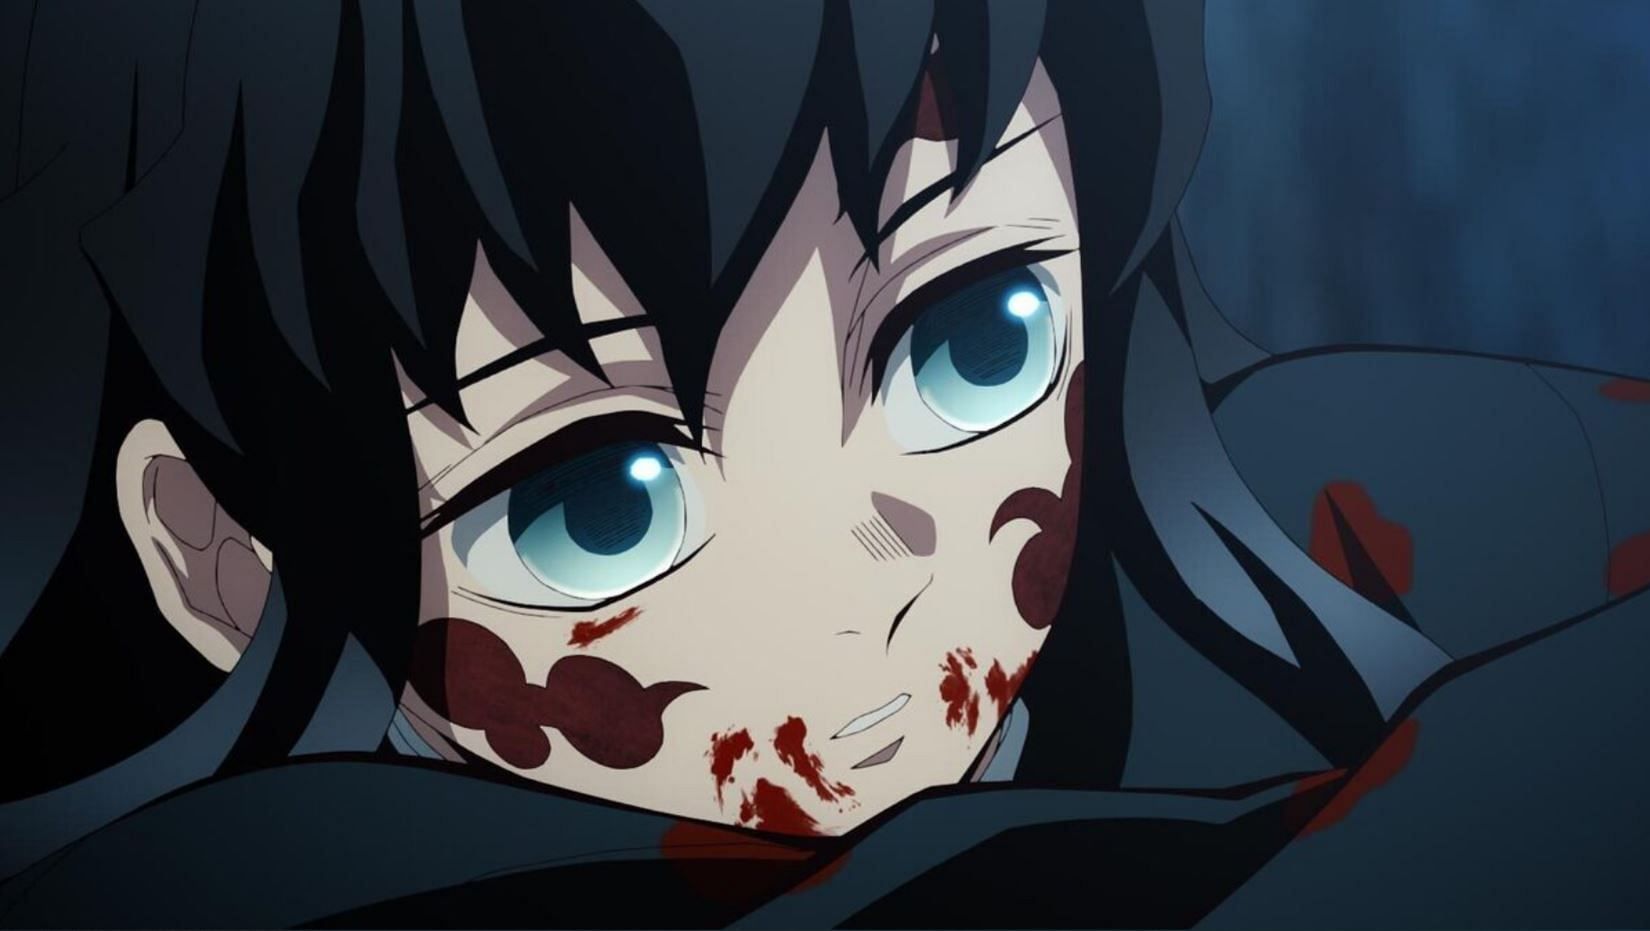 Demon Slayer season 3 episode 8: Release date and time, countdown